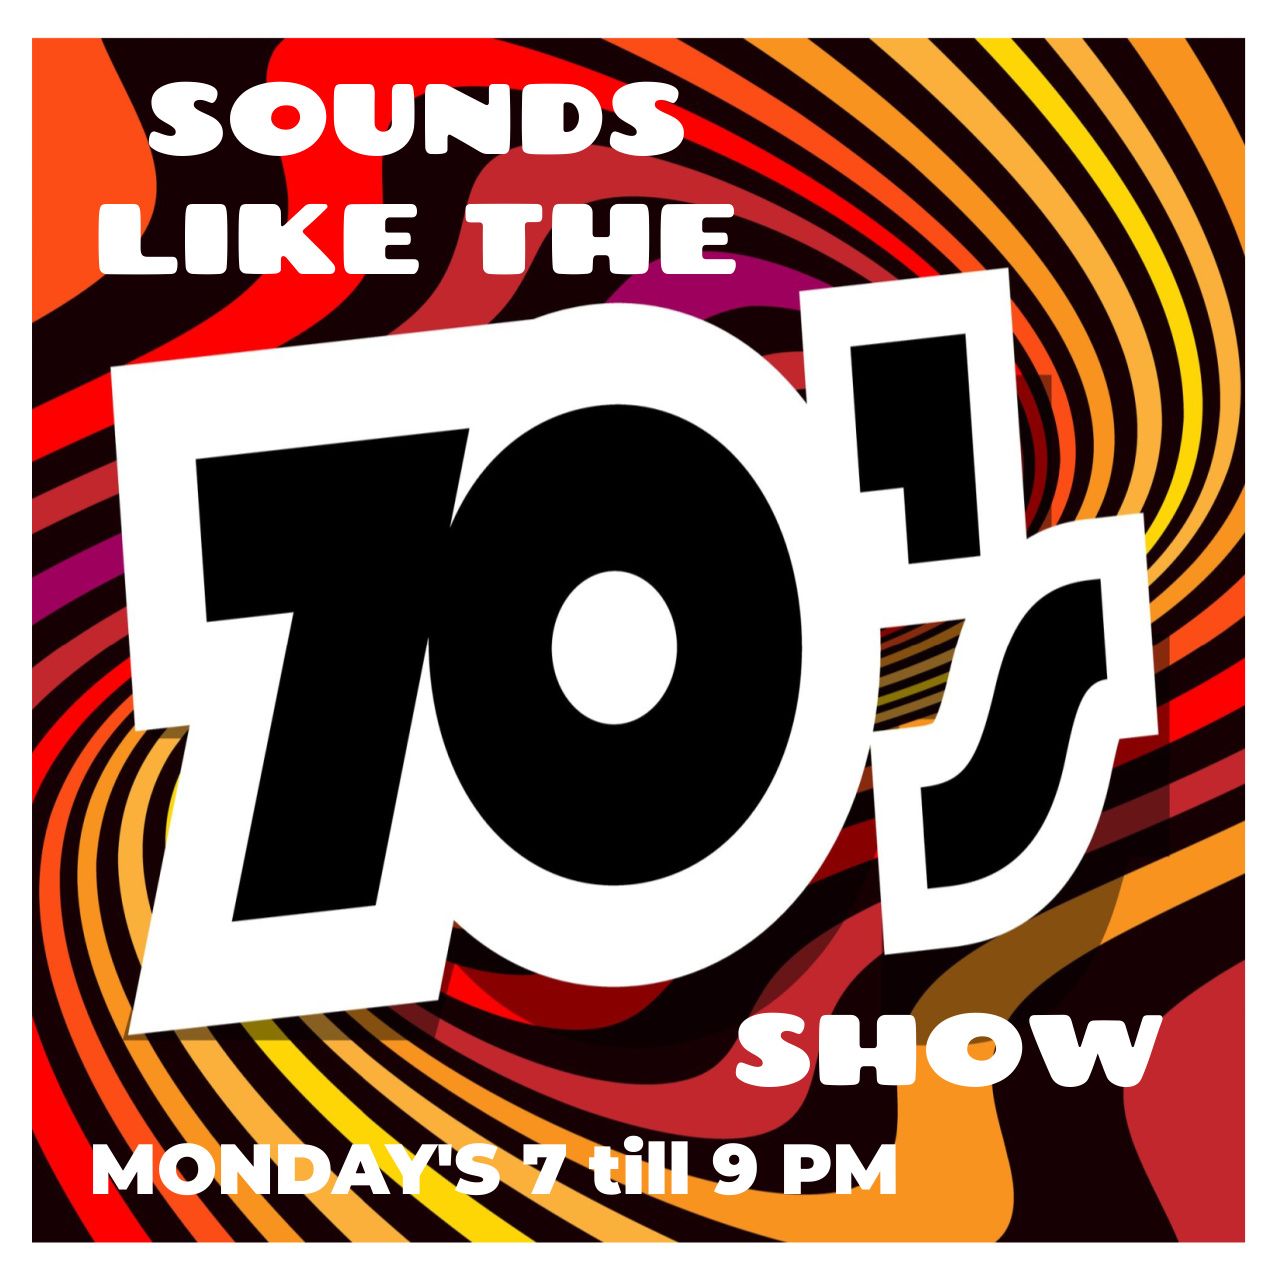 sounds_like_the_70s_show_mon_7_till_9_pm_1280_x_1280.jpg